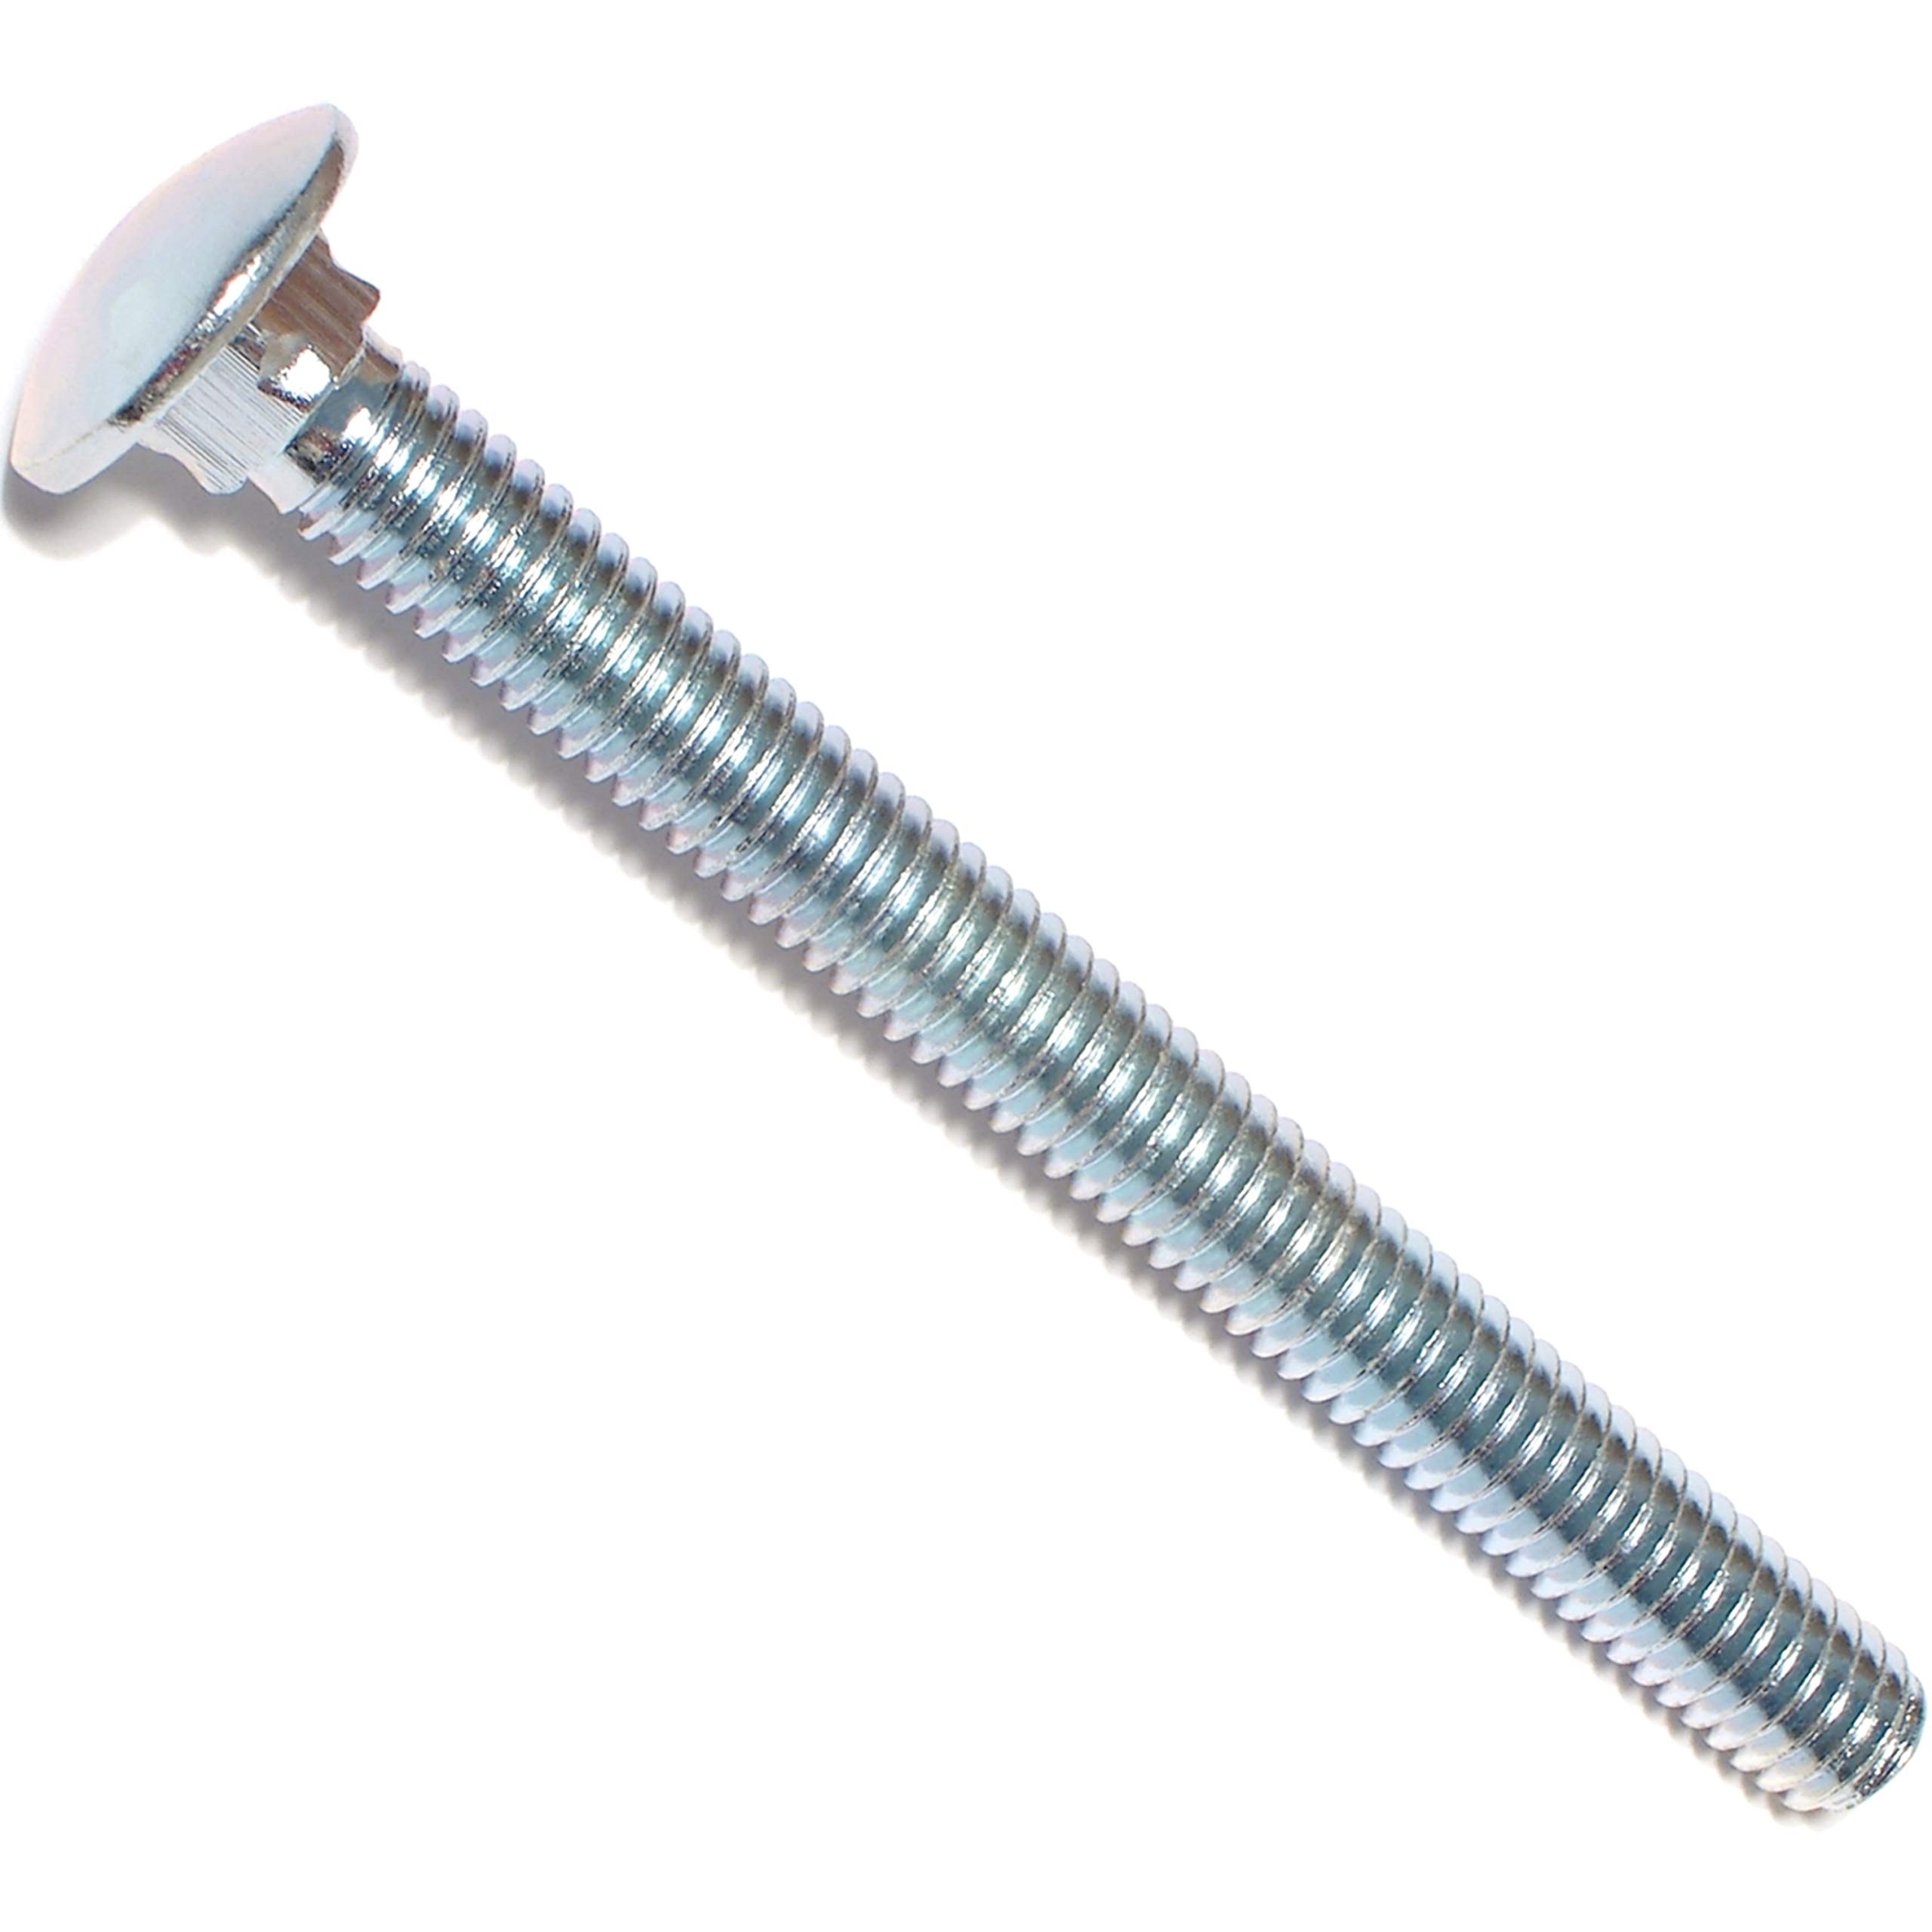 Hard-To-Find Fastener 014973230913 Midwest Carriage Bolt, 516-18 X 3-12 In, Zinc Plated